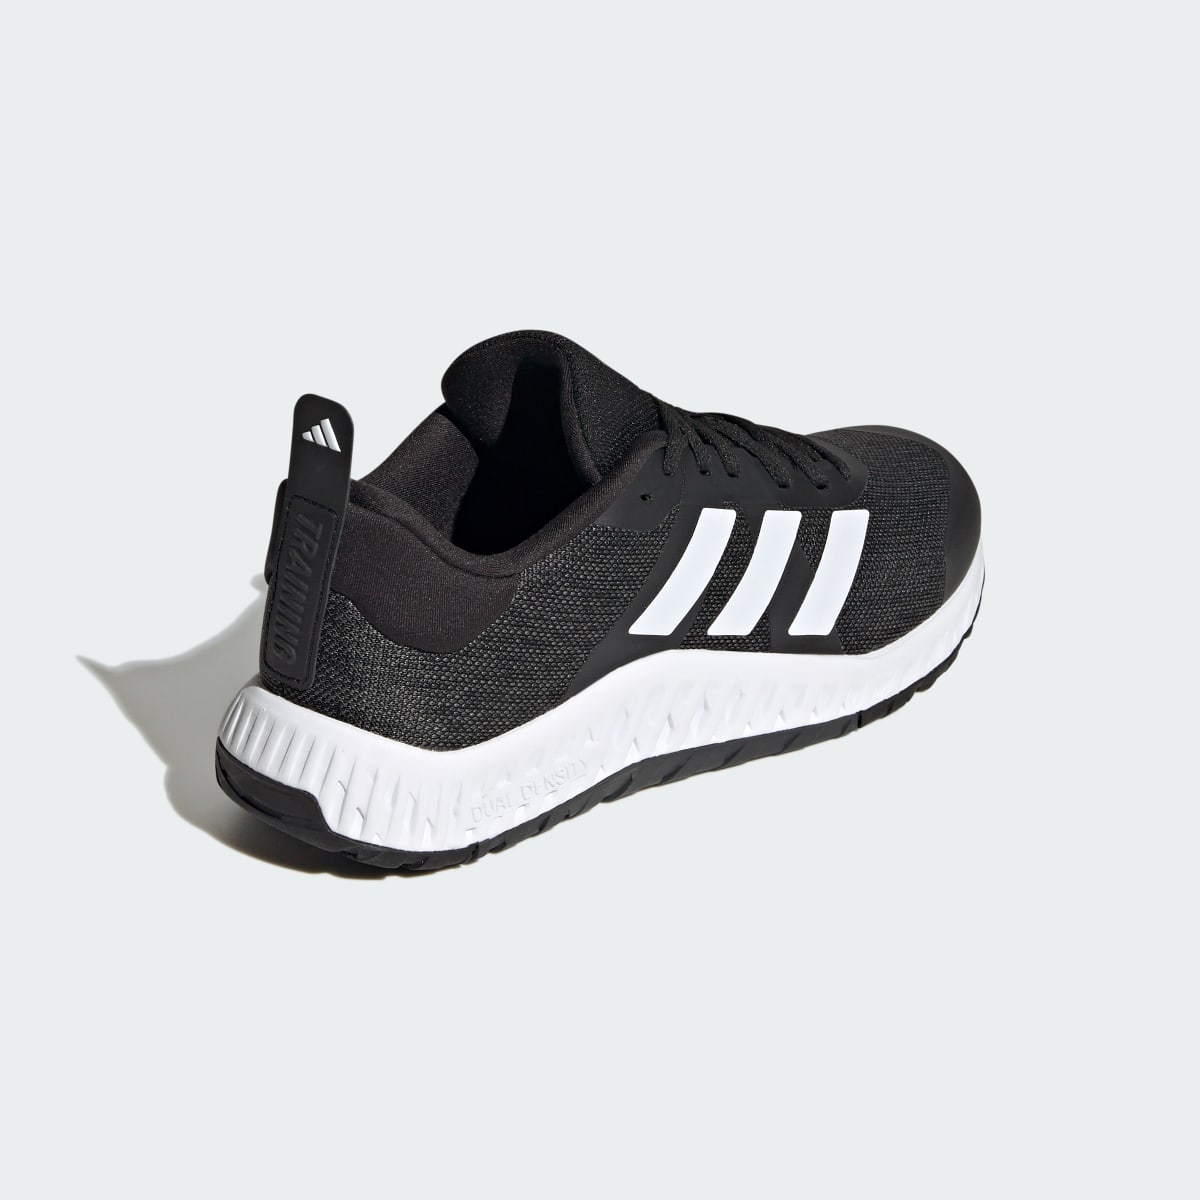 Adidas Everyset Trainer Shoes. 6